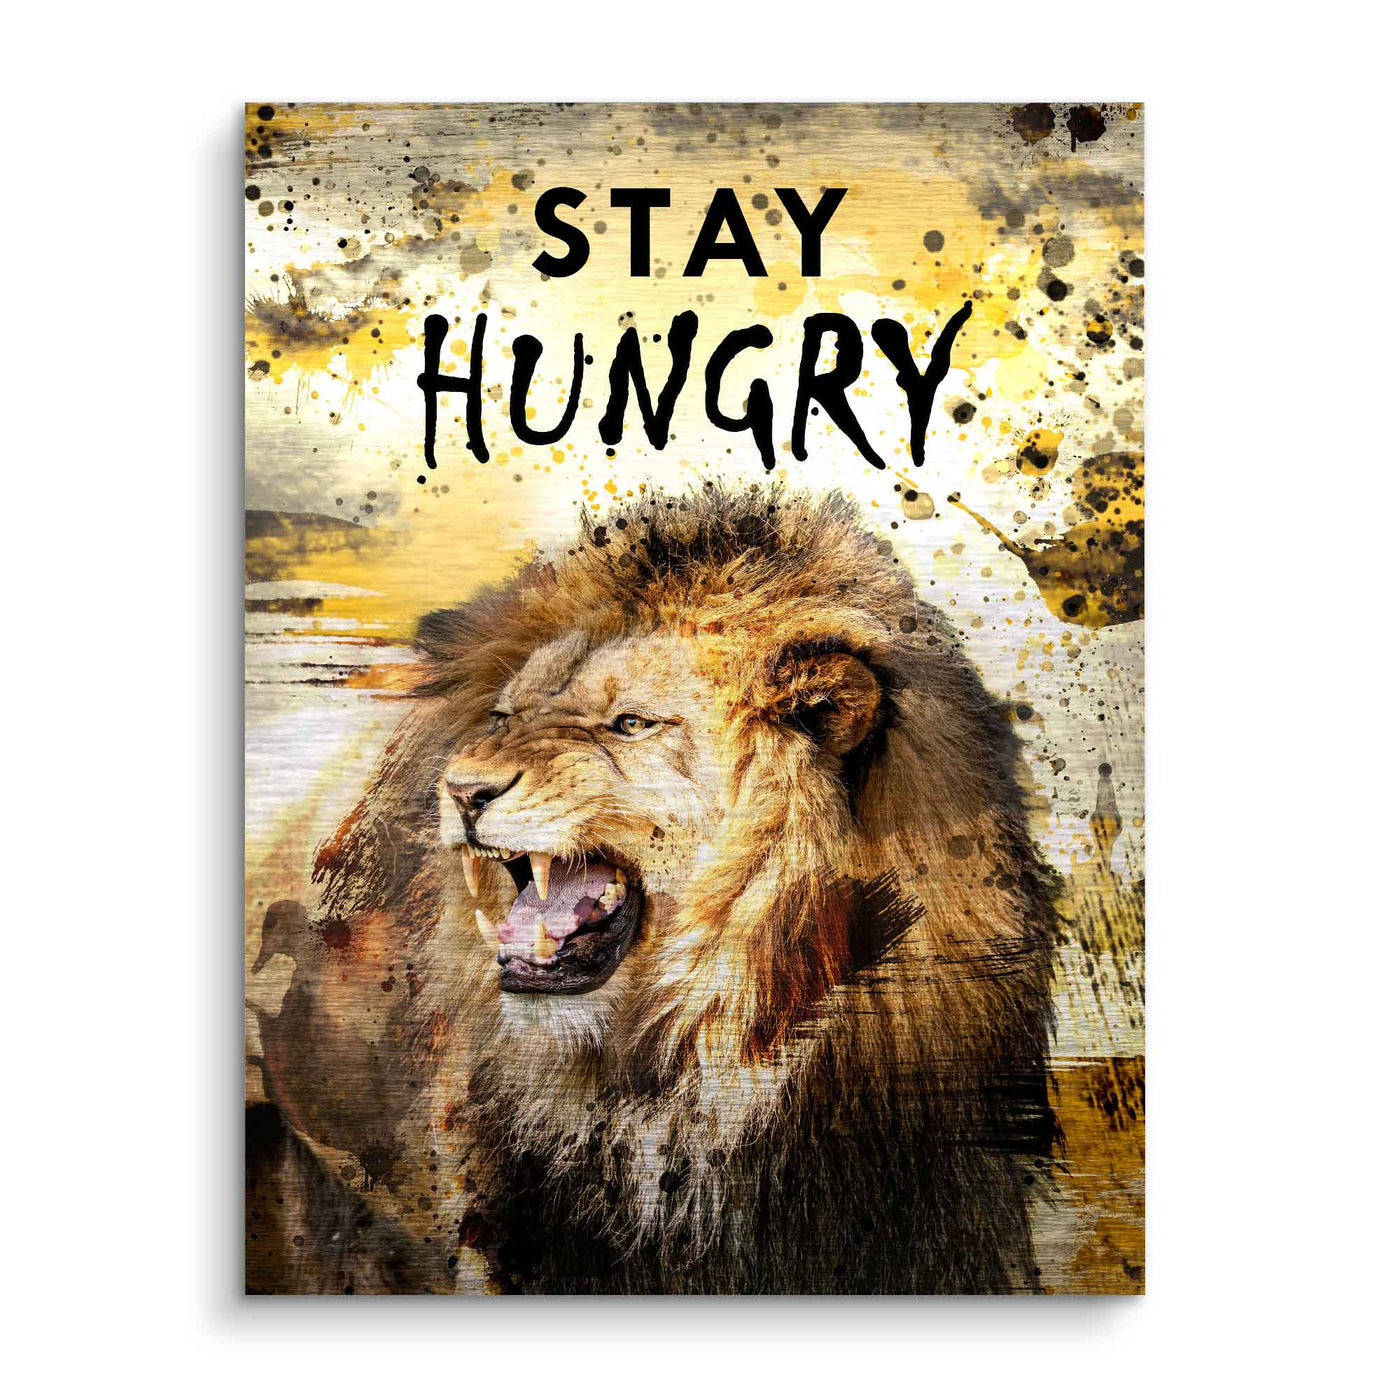 Stay hungry